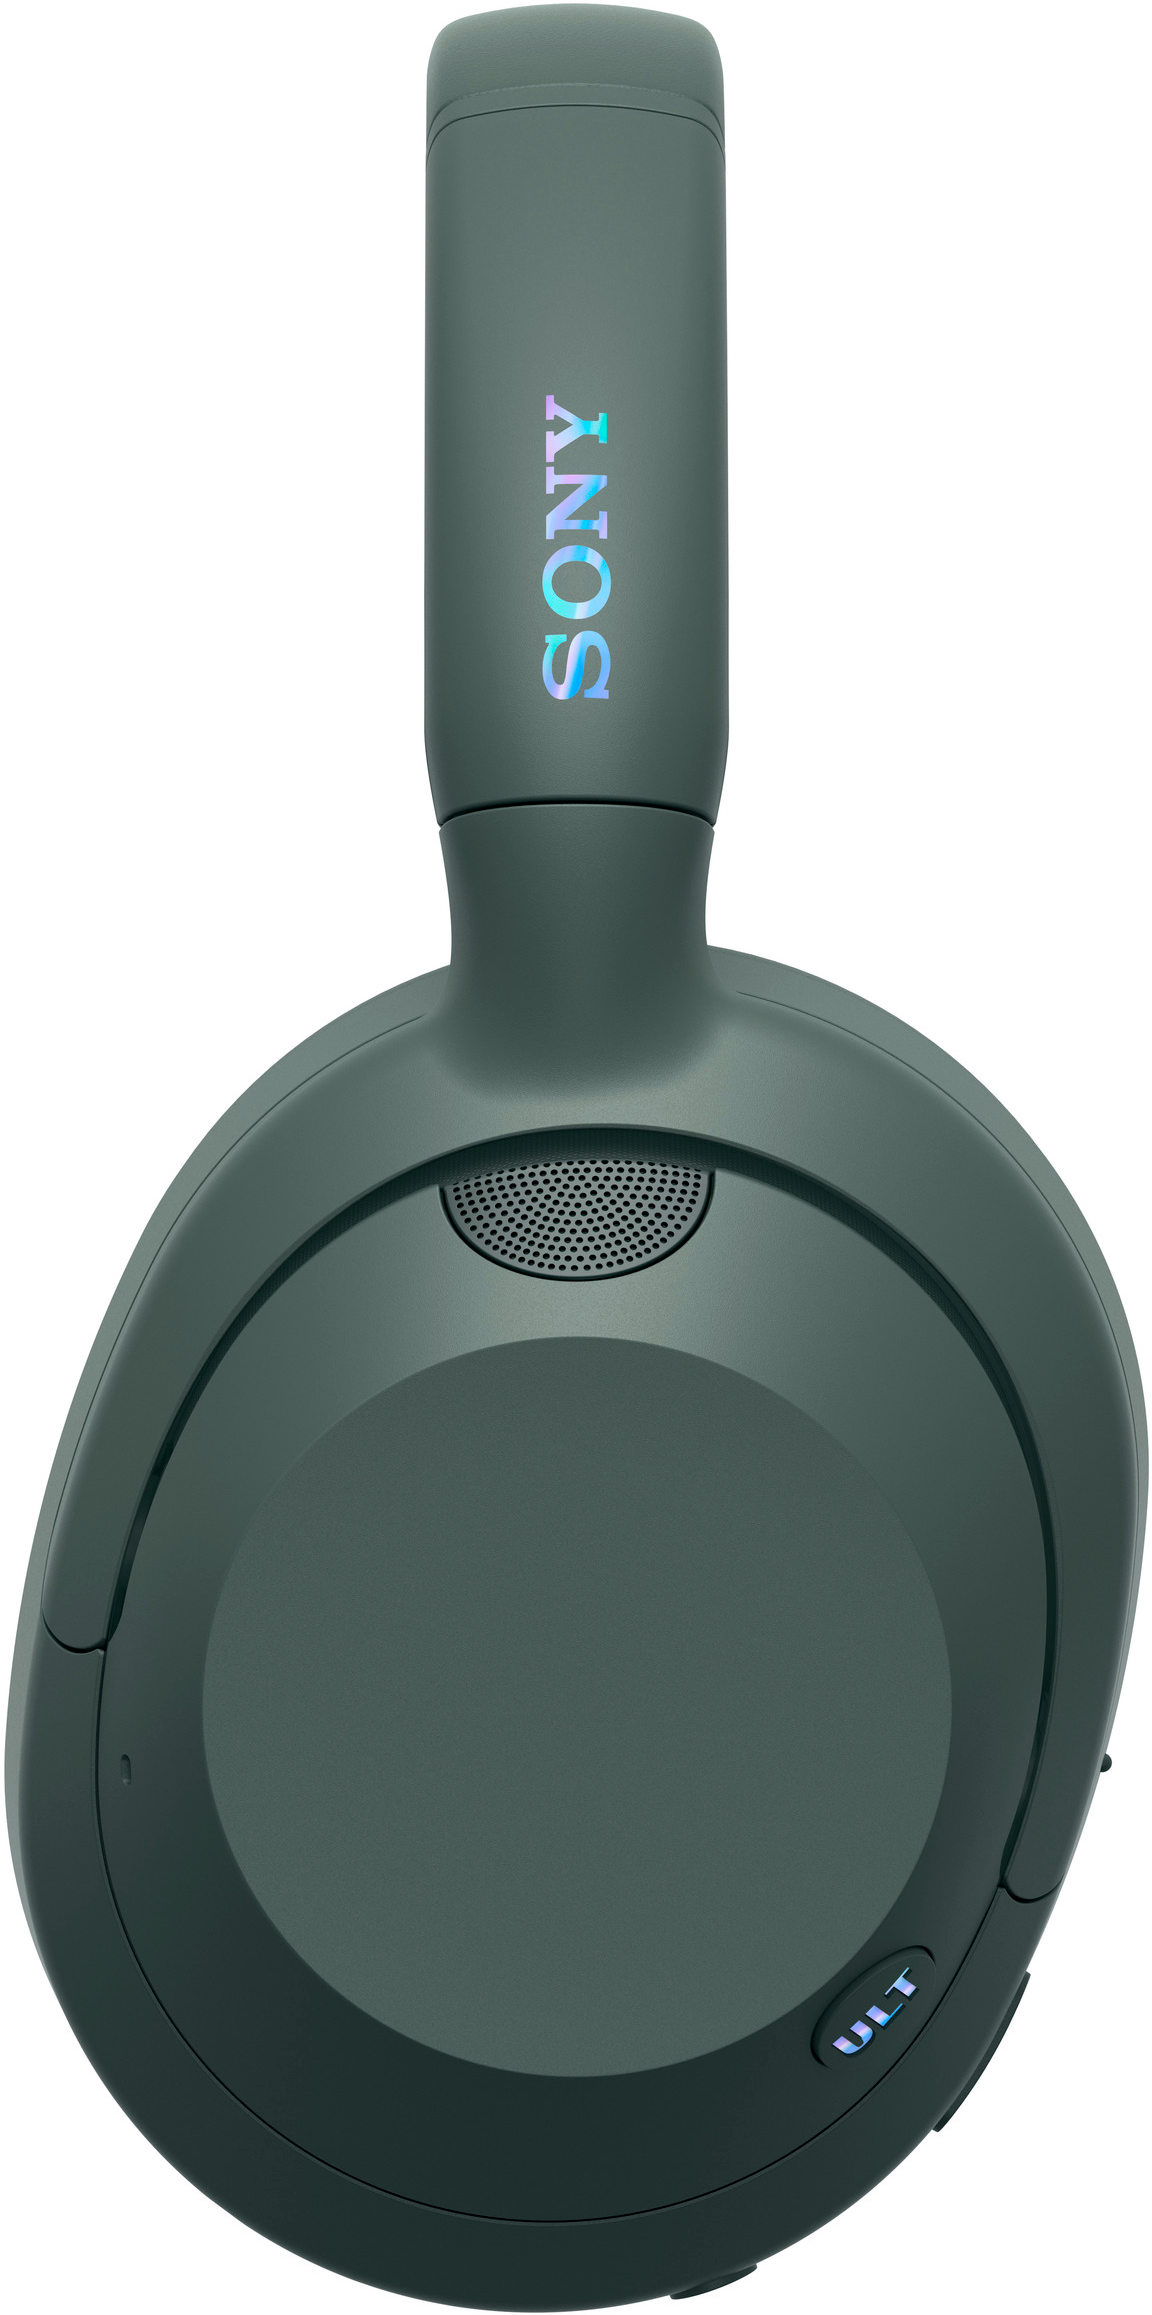 Навушники Bluetooth Sony Over-ear ULT WEAR Forest Gray (WHULT900NH.CE7)фото4